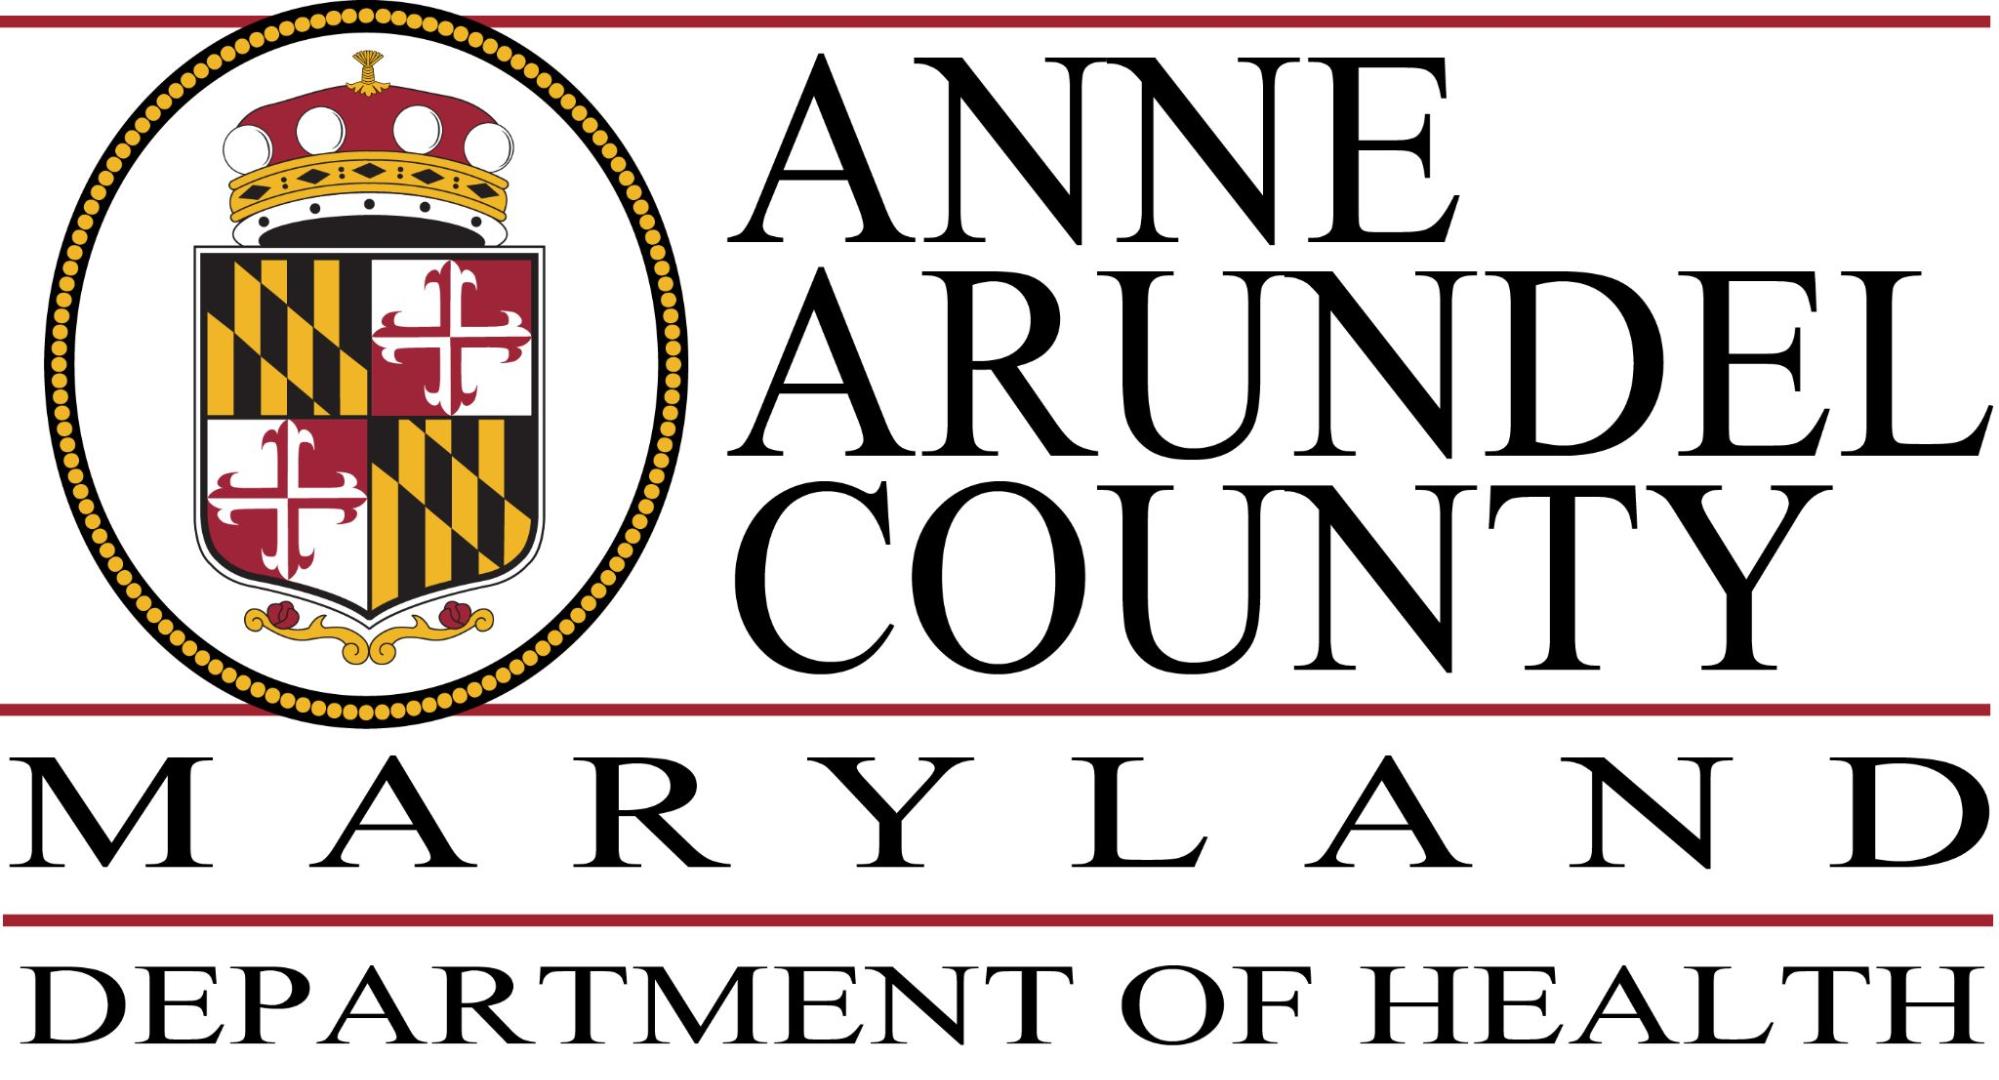 Anne Arundel County Maryland Department of Health Logo